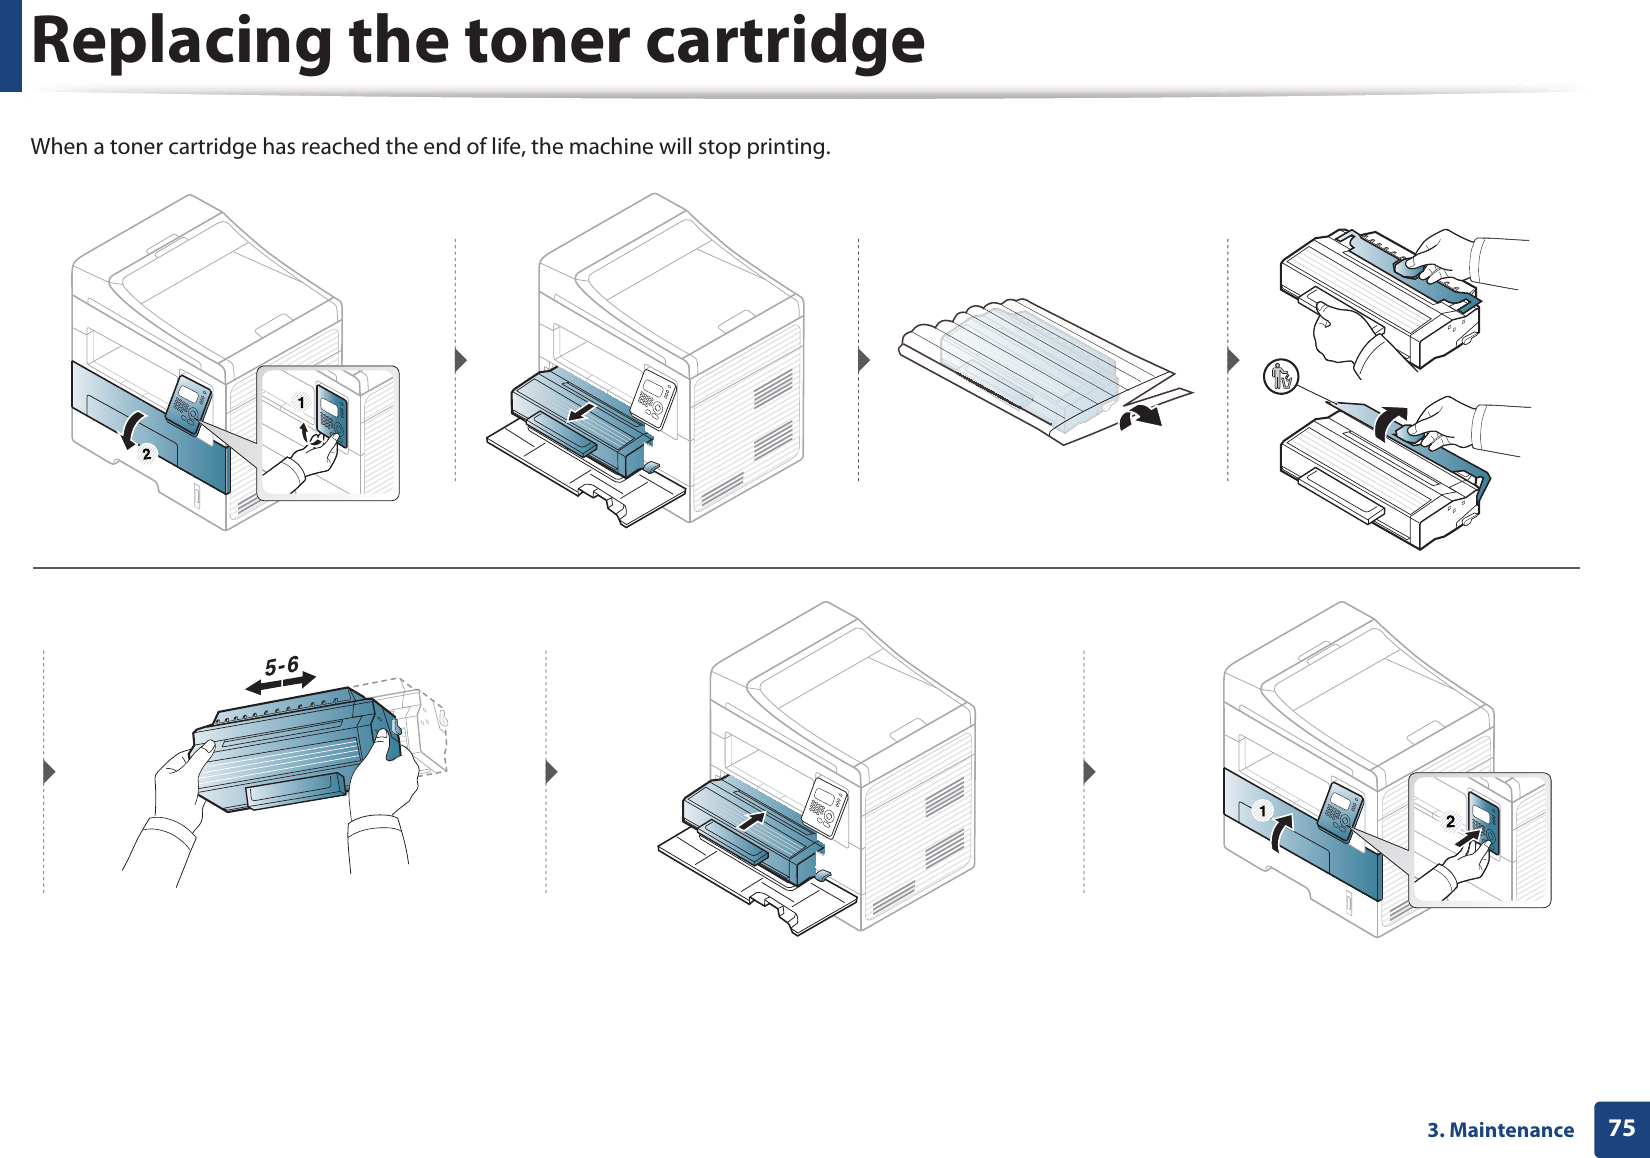 Replacing the toner cartridge753. MaintenanceWhen a toner cartridge has reached the end of life, the machine will stop printing.